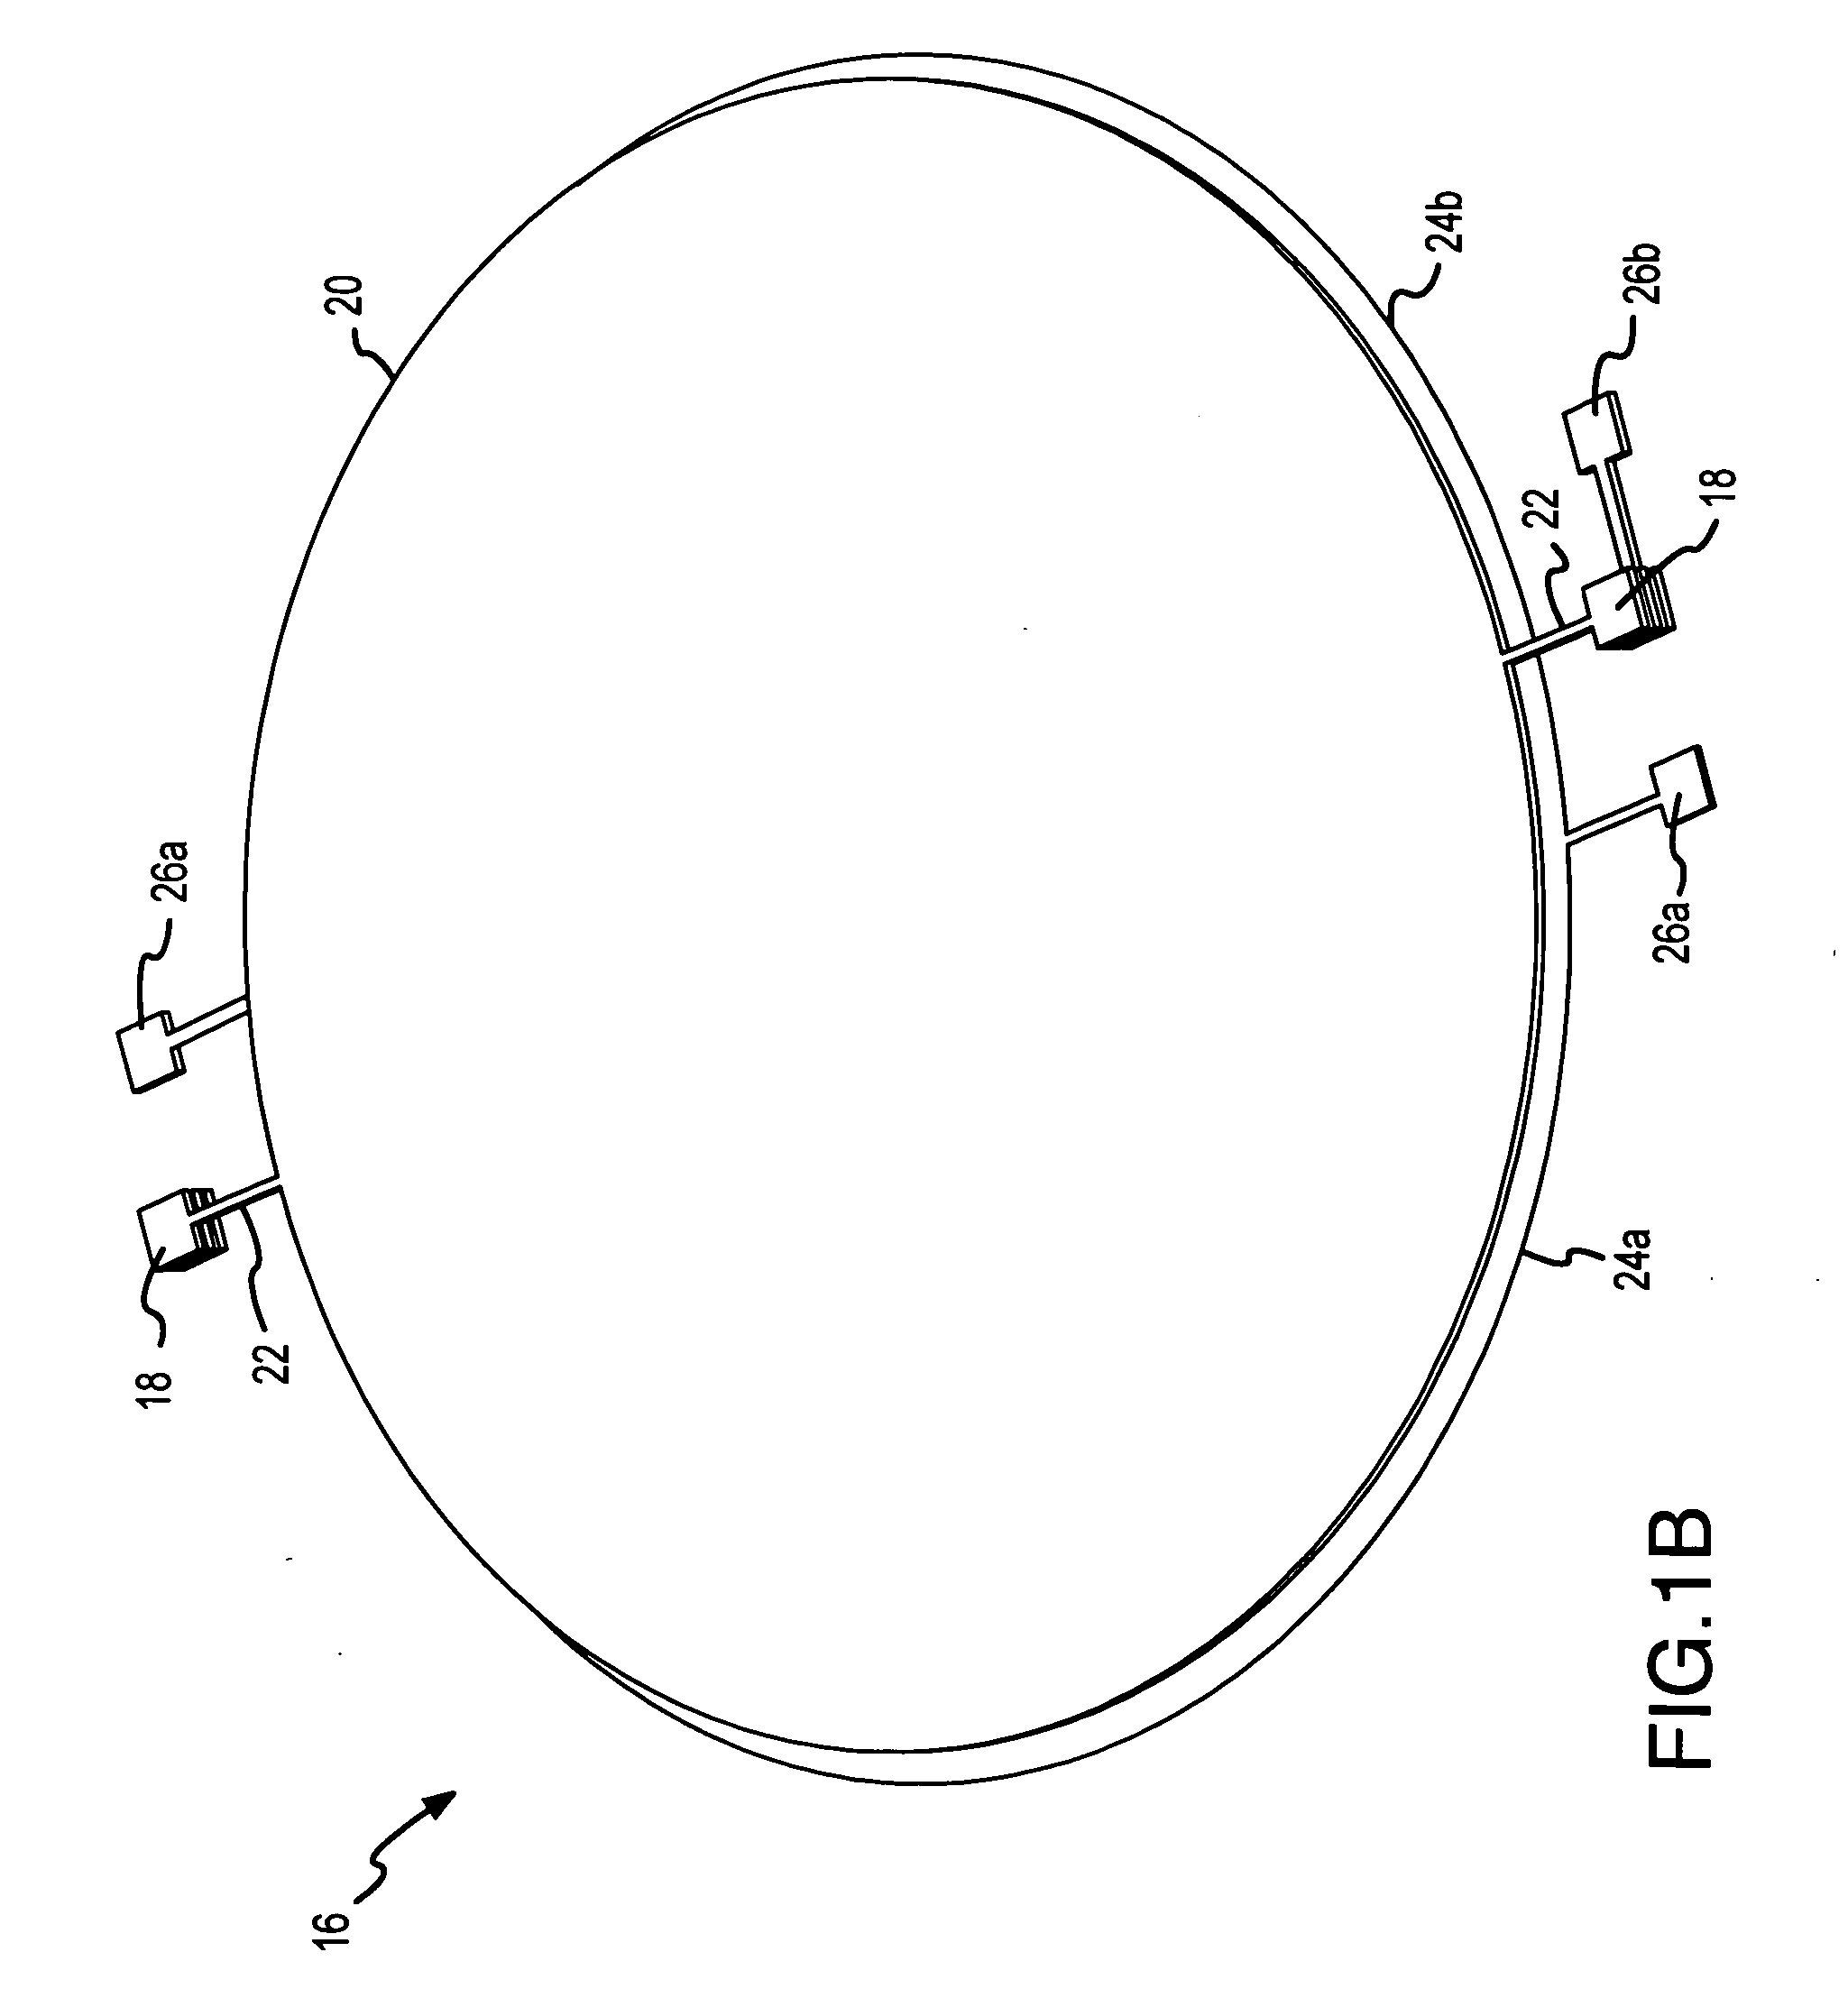 Method for making a microstructure by surface micromachining